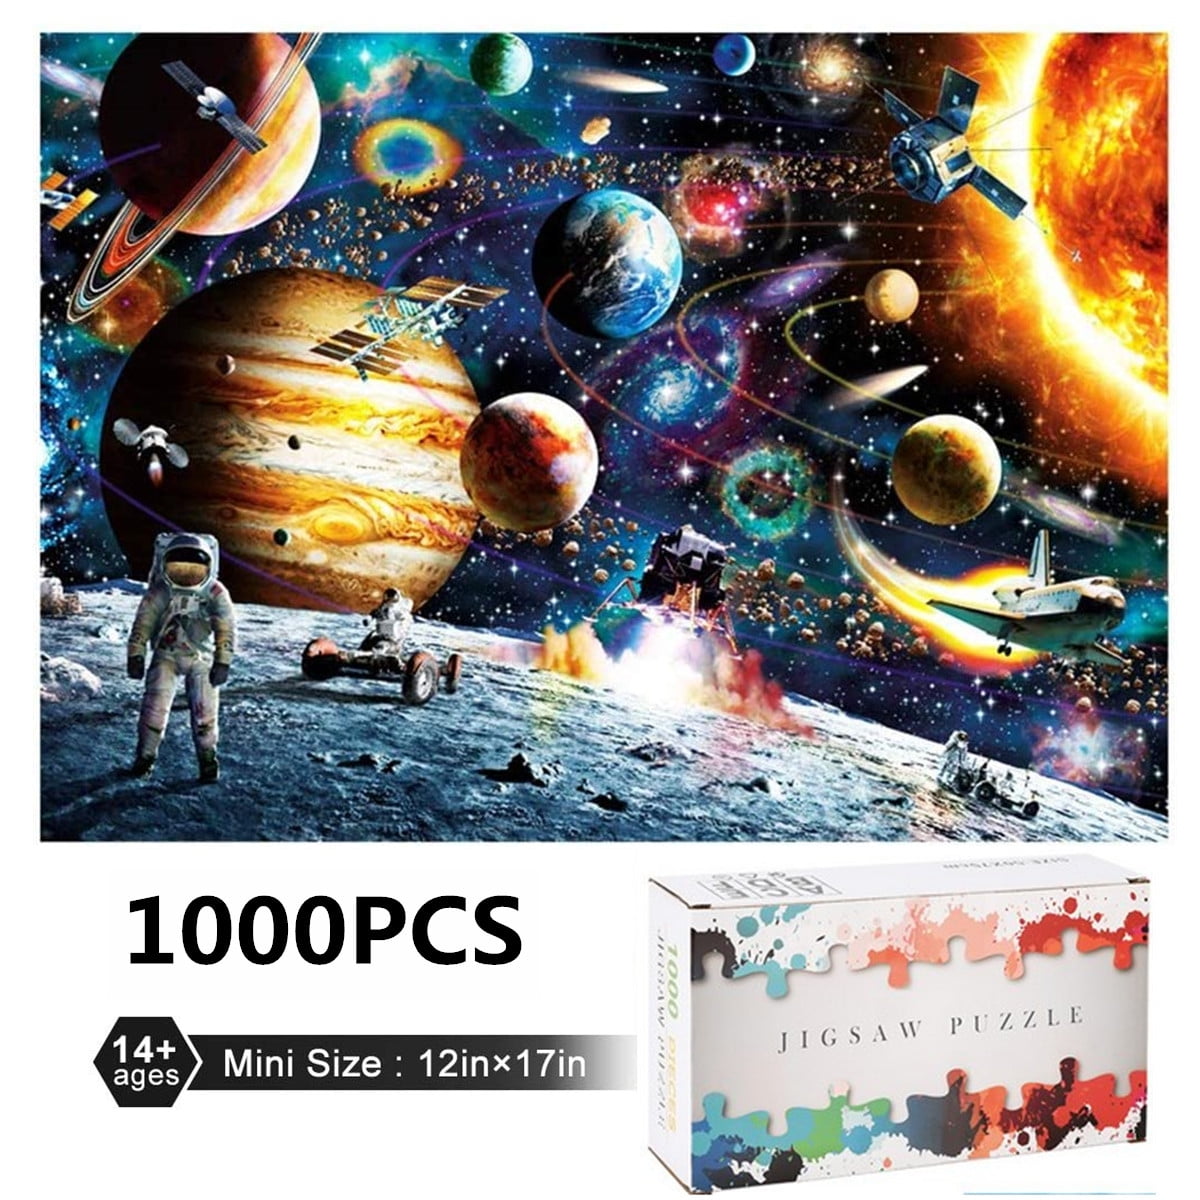 1000 Piece Creative Door Educational Jigsaw Puzzle Adults Kids Puzzle Toy 